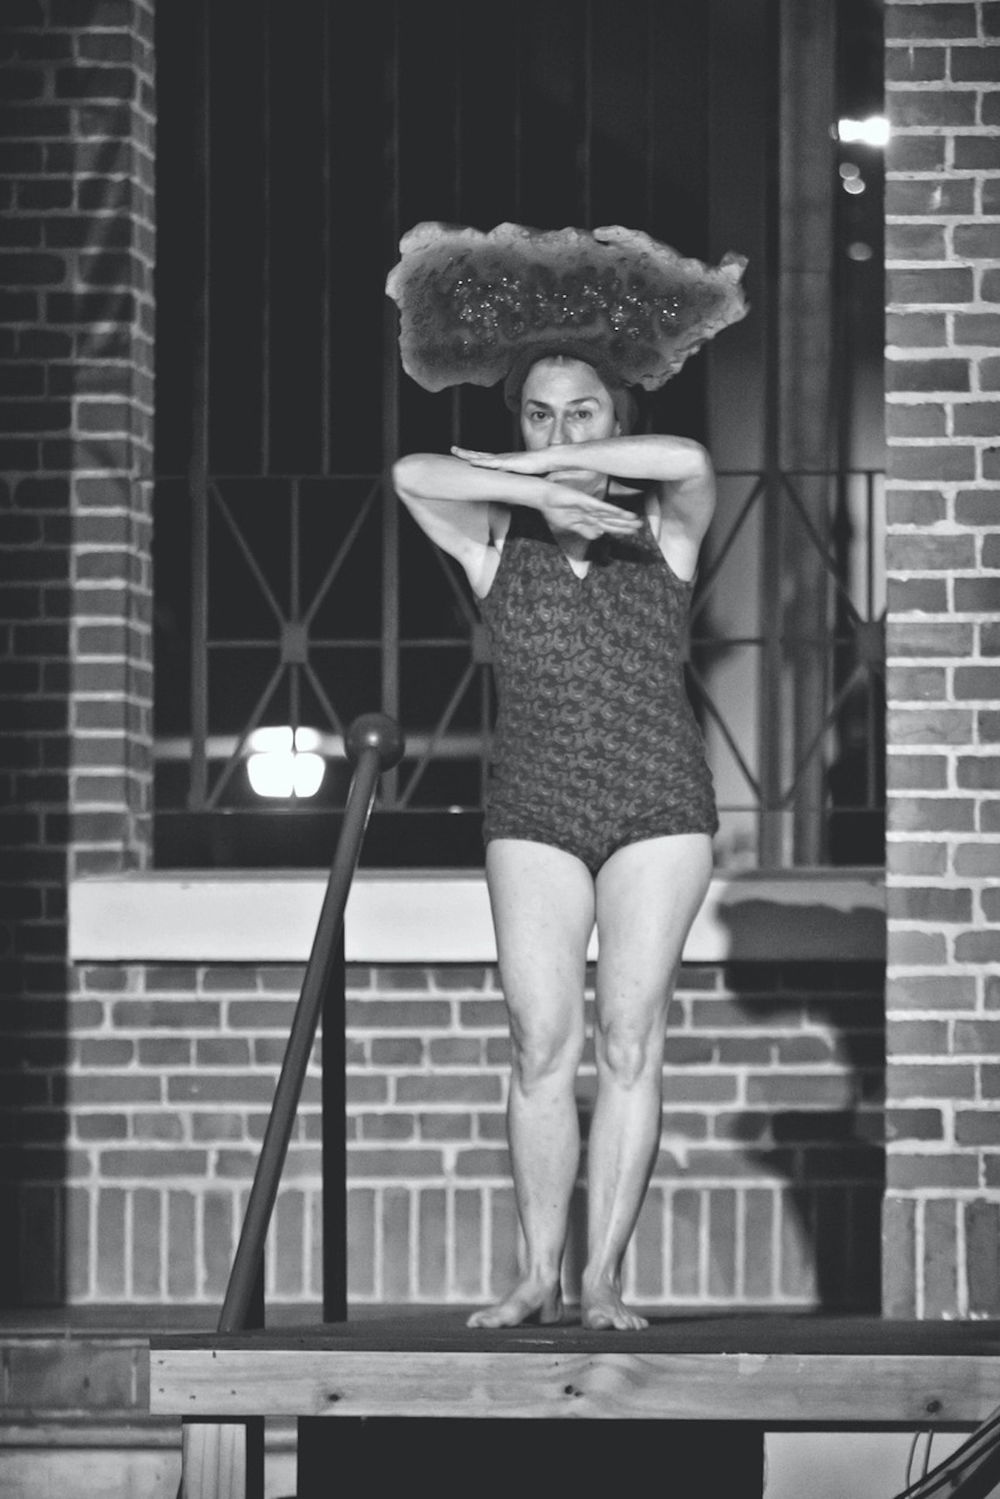 A black-and-white photograph of a woman in a leotard standing on a wooden ledge in front of a brick building; her arms are folded in front of her mouth and she looks out over them. She wears a headpiece that is shaped like the island of Puerto Rico.